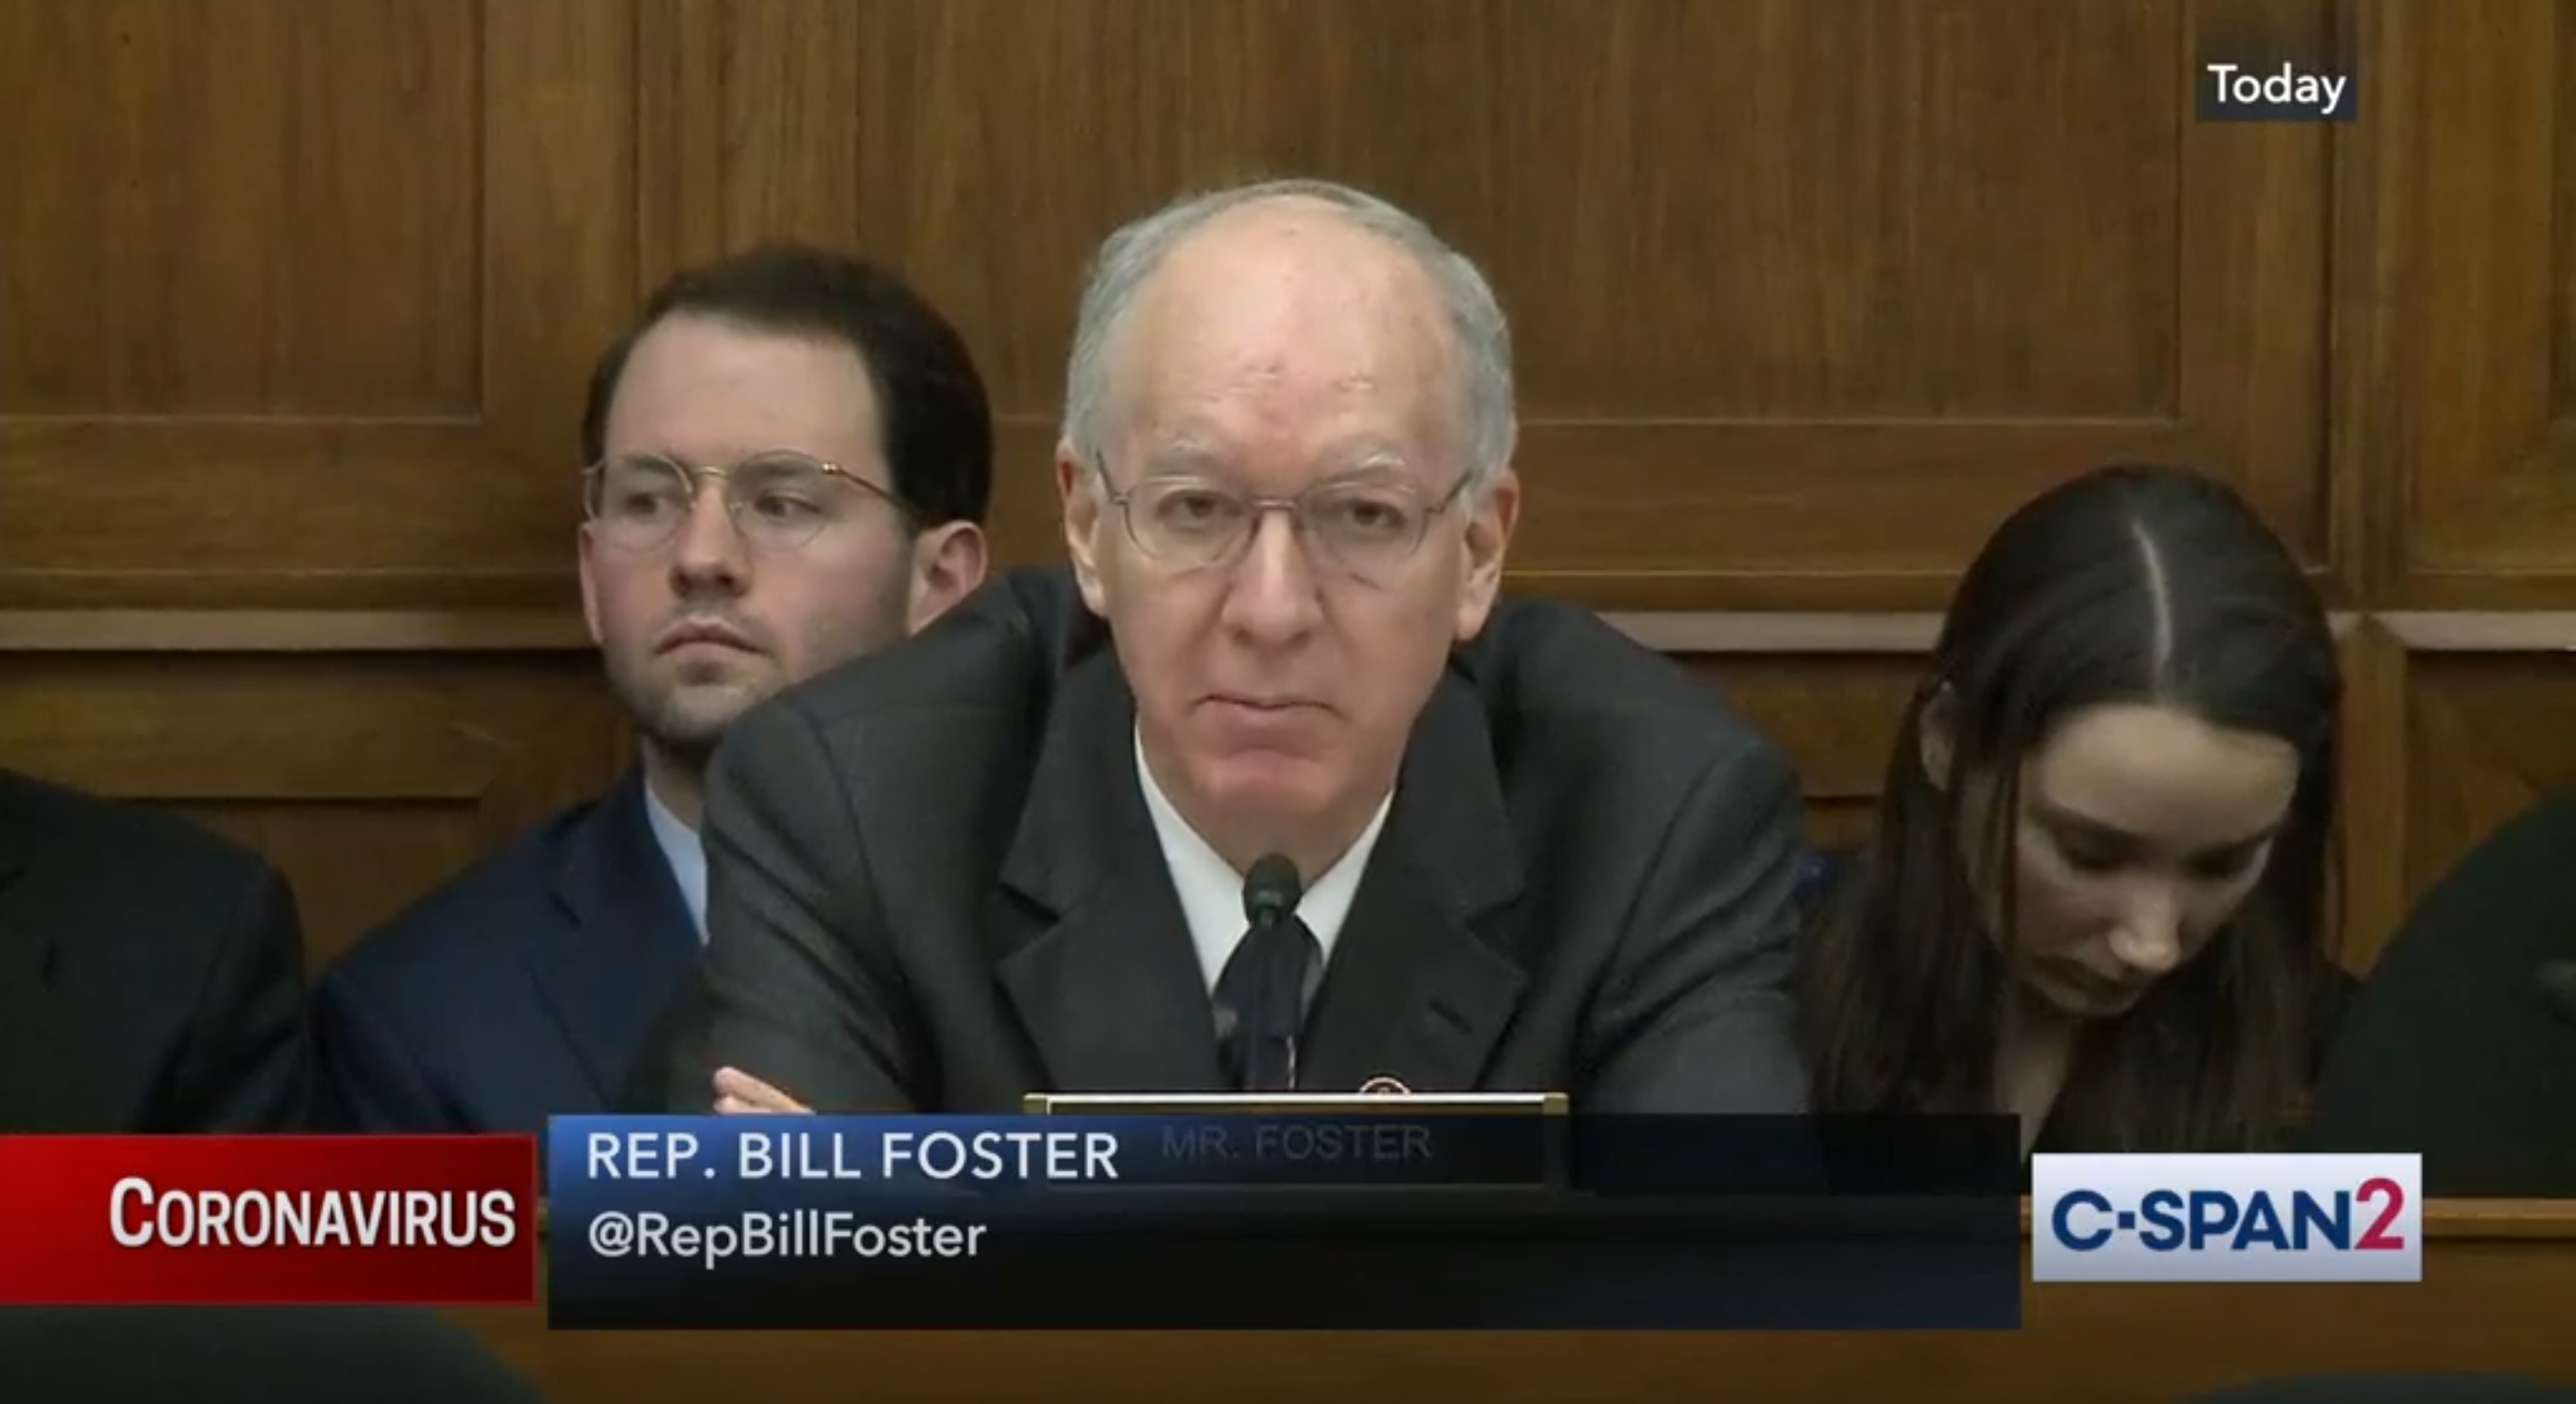 U.S. Representative Bill Foster (D-IL) during the hearing on the coronavirus on March 5. Image courtesy C-SPAN.